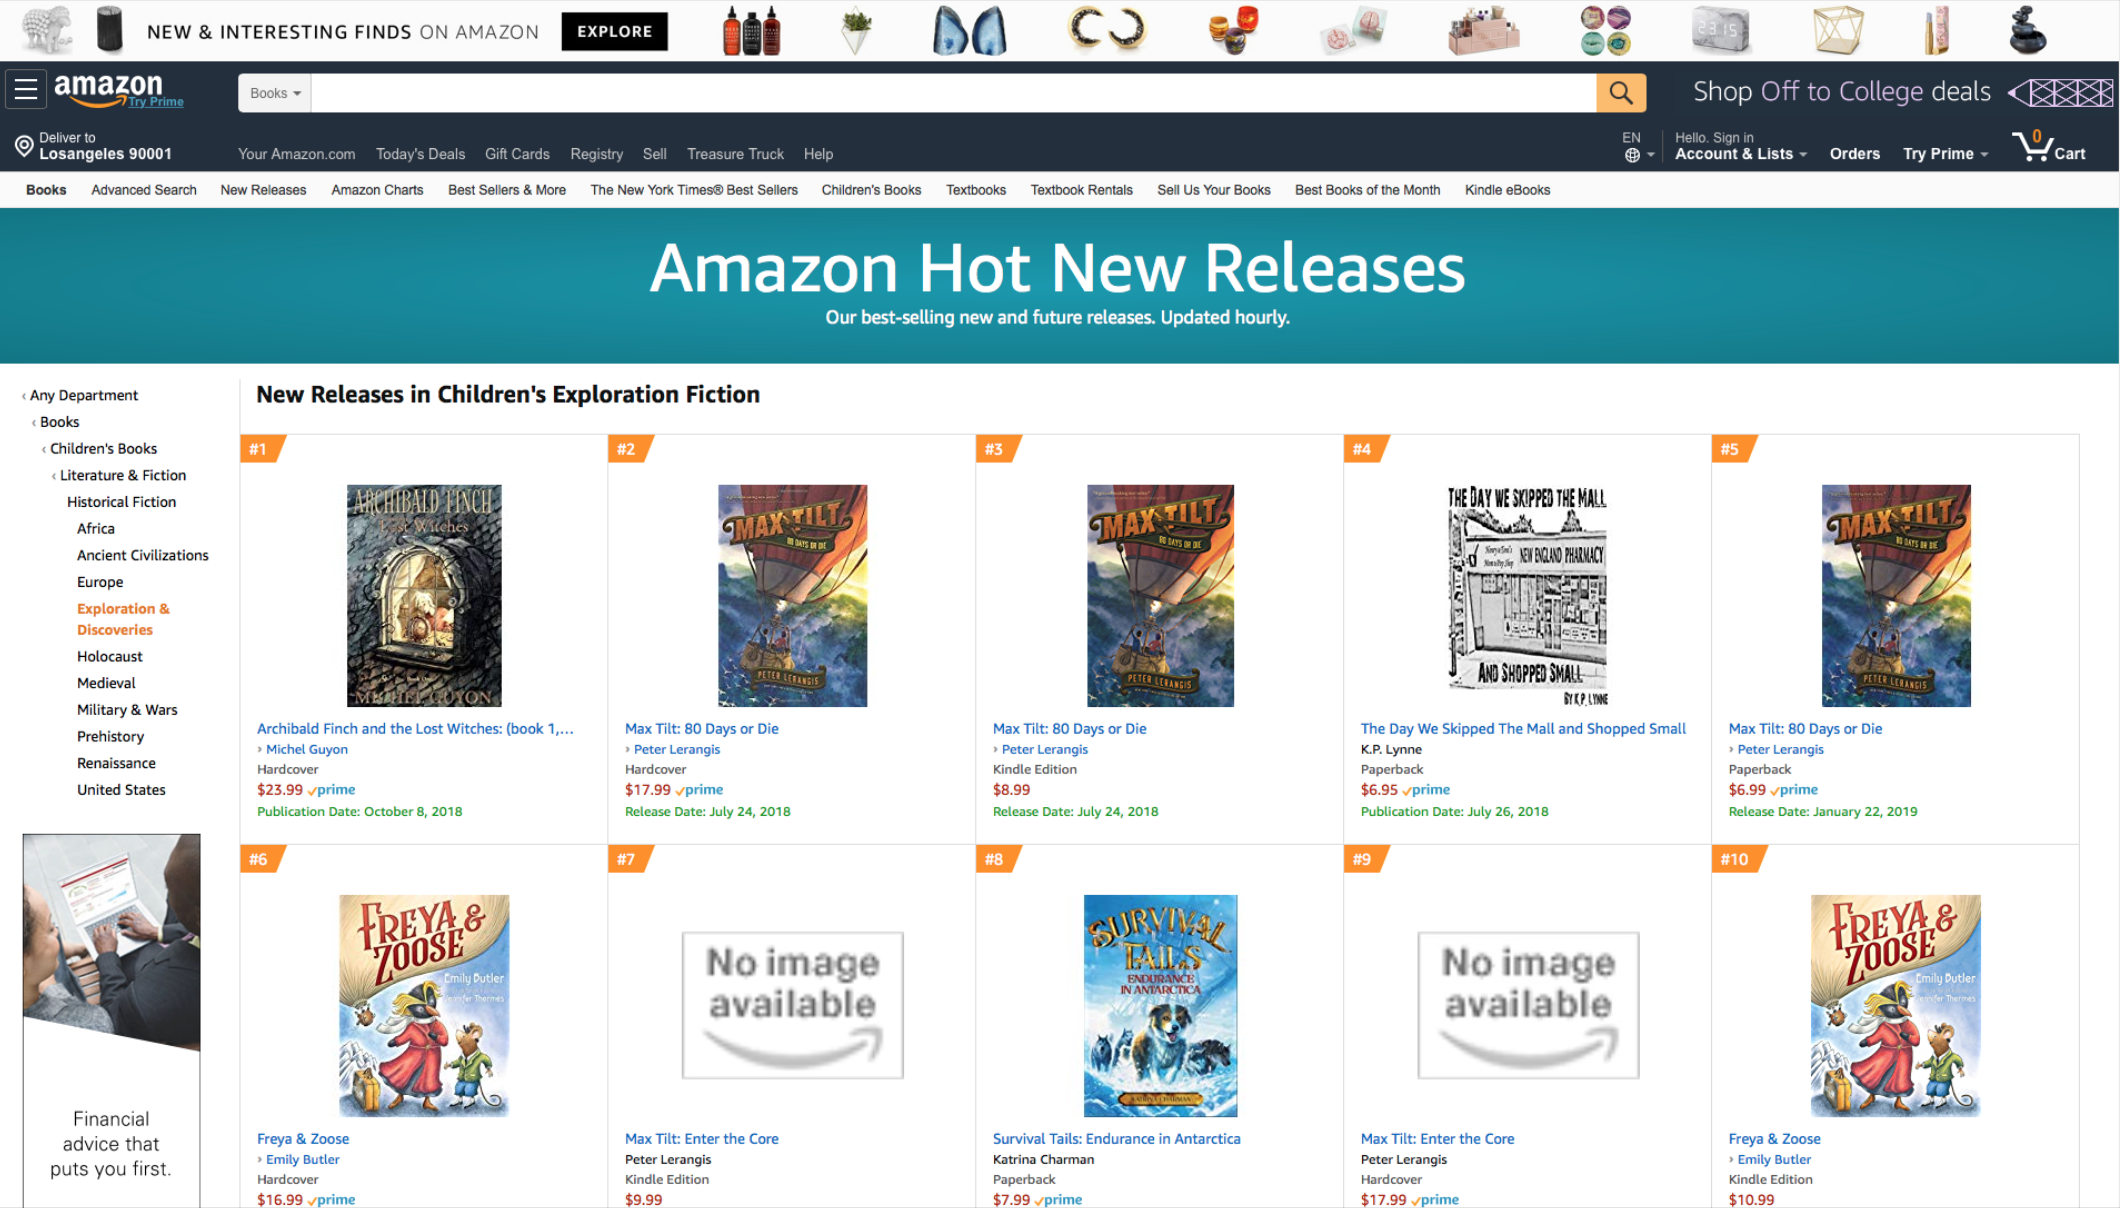 Amazon Hot New Releases #1 - Archibald Finch and the Lost Witches